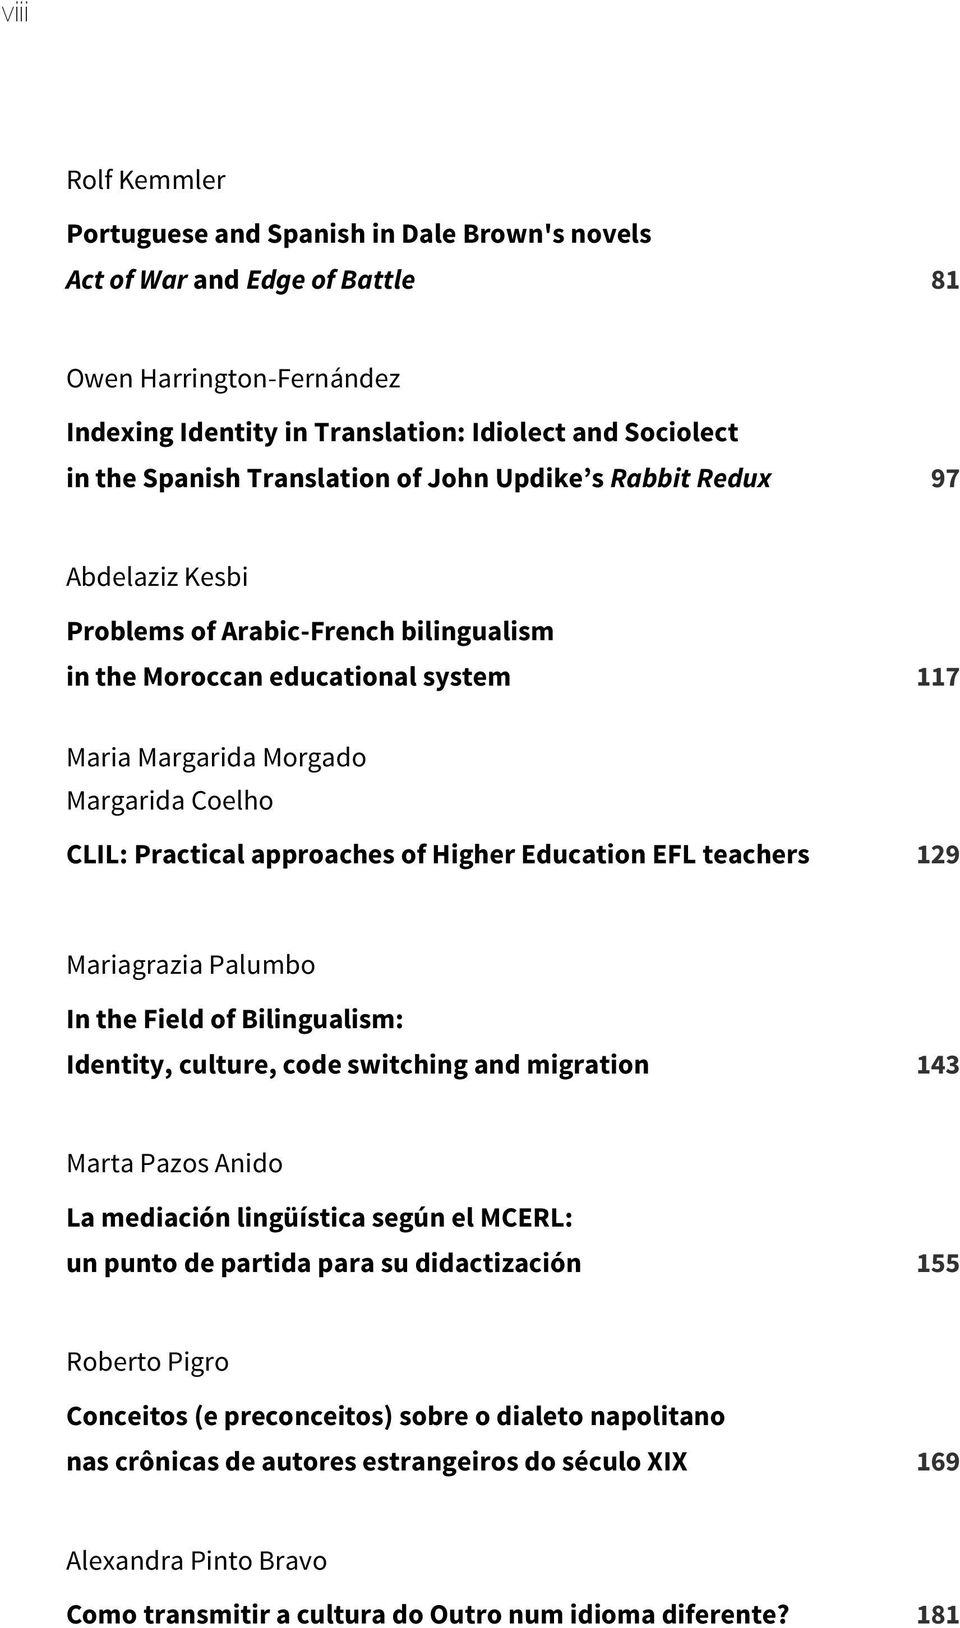 approaches of Higher Education EFL teachers 129 Mariagrazia Palumbo In the Field of Bilingualism: Identity, culture, code switching and migration 143 Marta Pazos Anido La mediación lingüística según